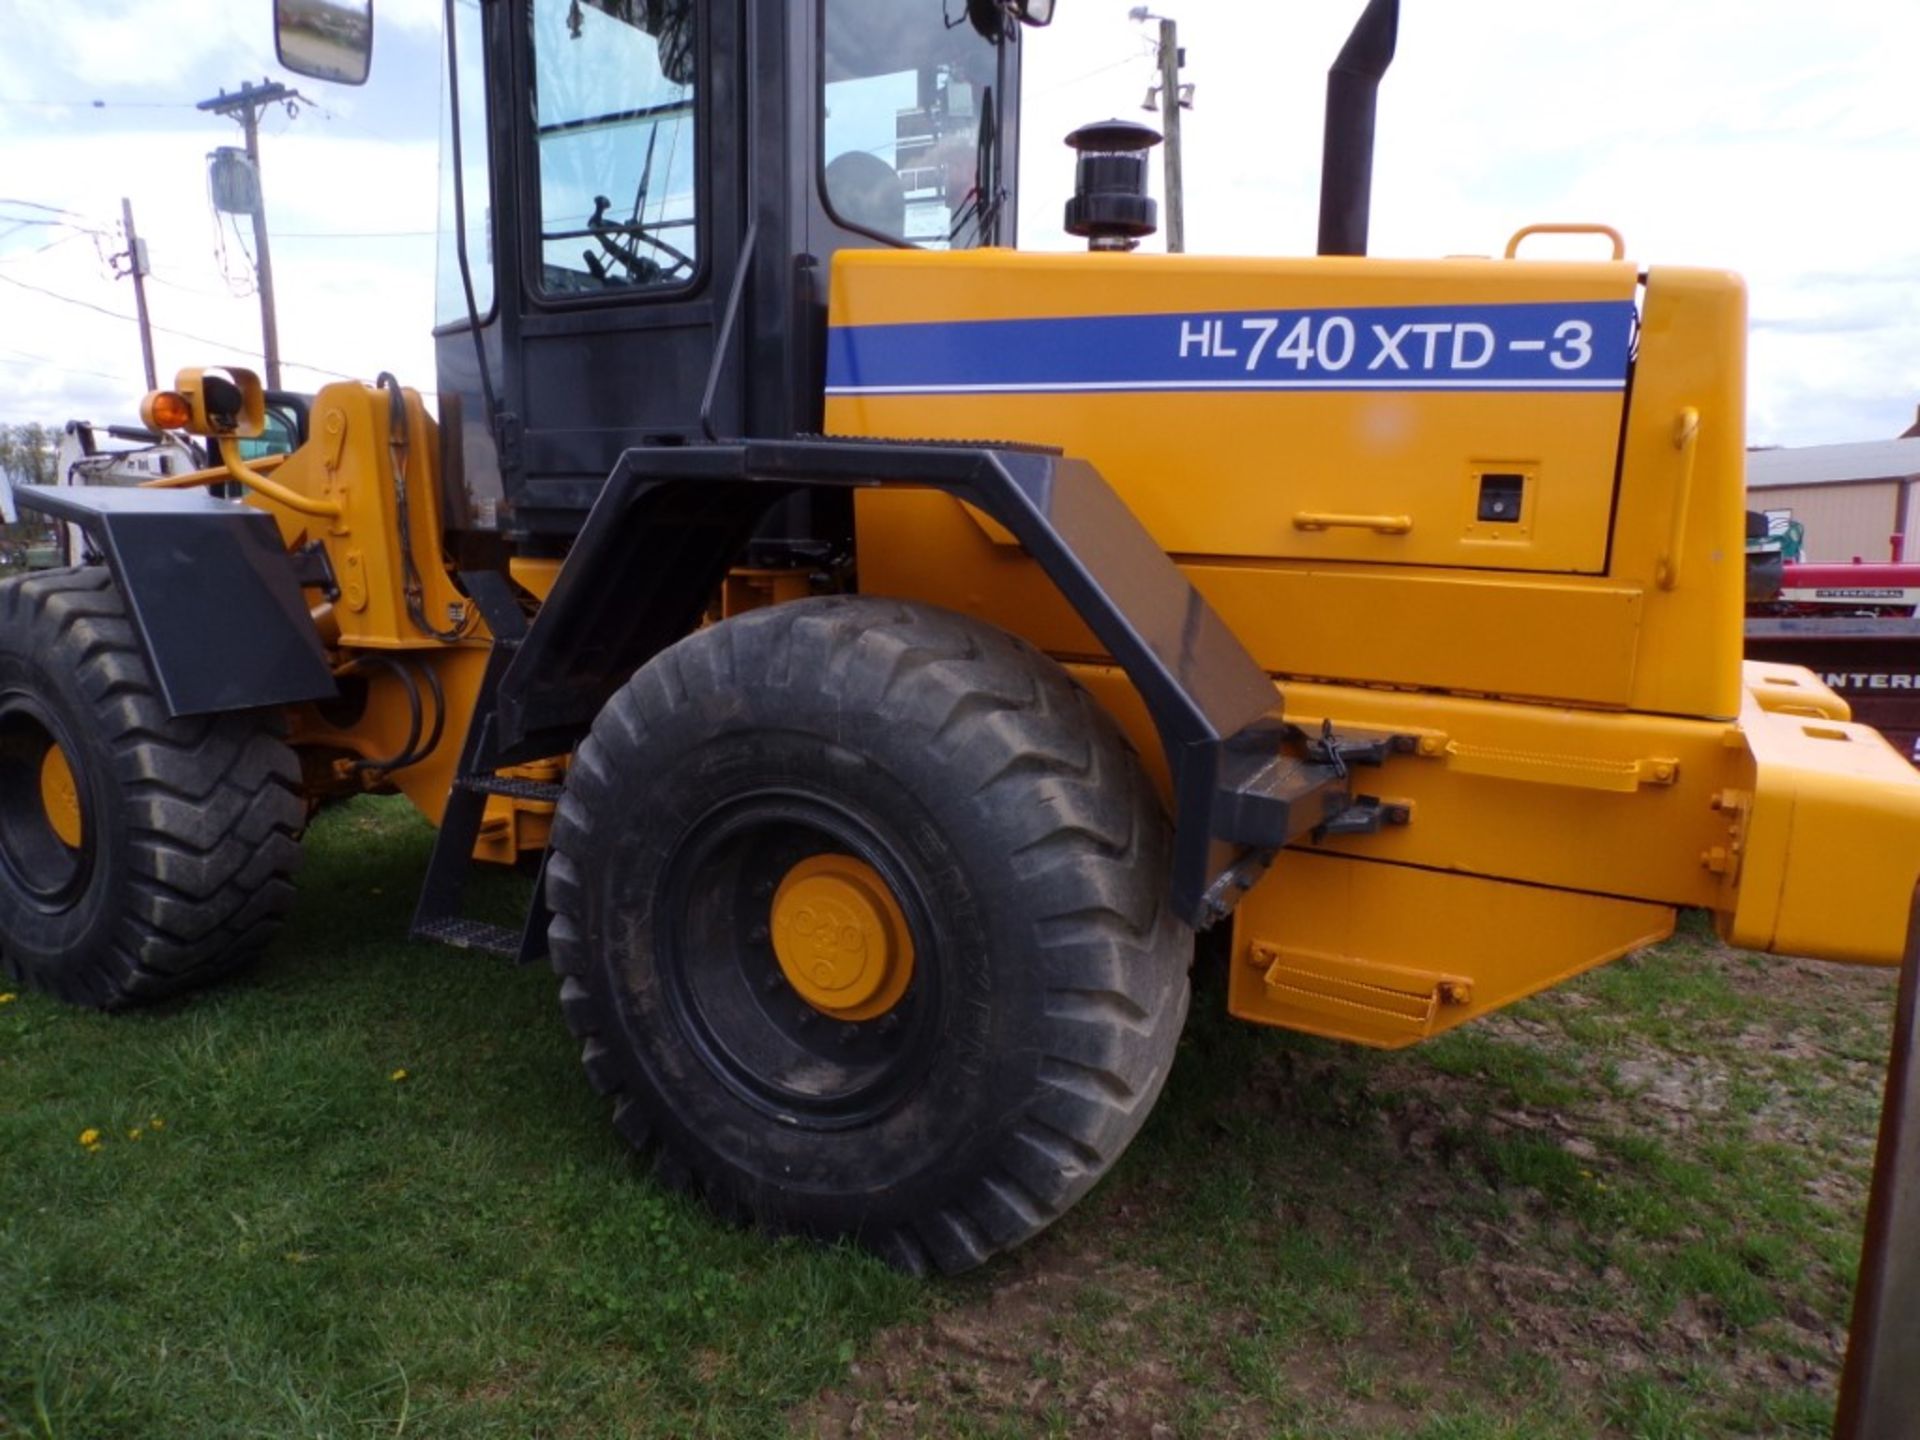 Hyndai HL-740XTD-3 4 WD Loader with JRB Hydraulic Quik Coupler, 2 1/2 Yard Bucket, 20.5-25 Tires, - Image 4 of 6